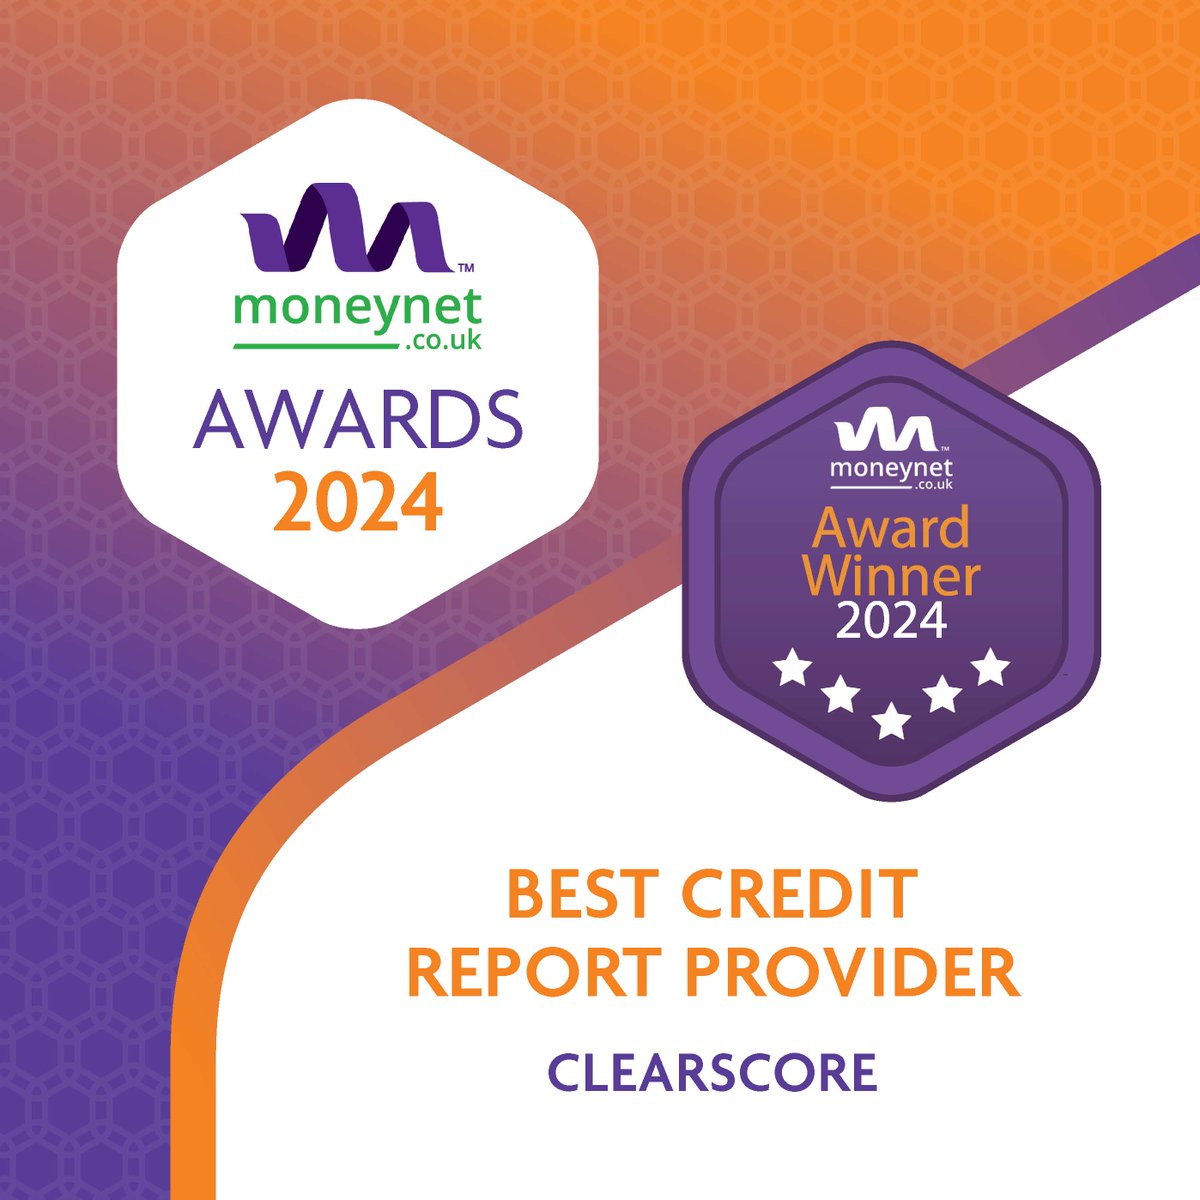 Congratulations to the team @ClearScore for their success in the 2024 Moneynet Awards #MoneynetAwards24